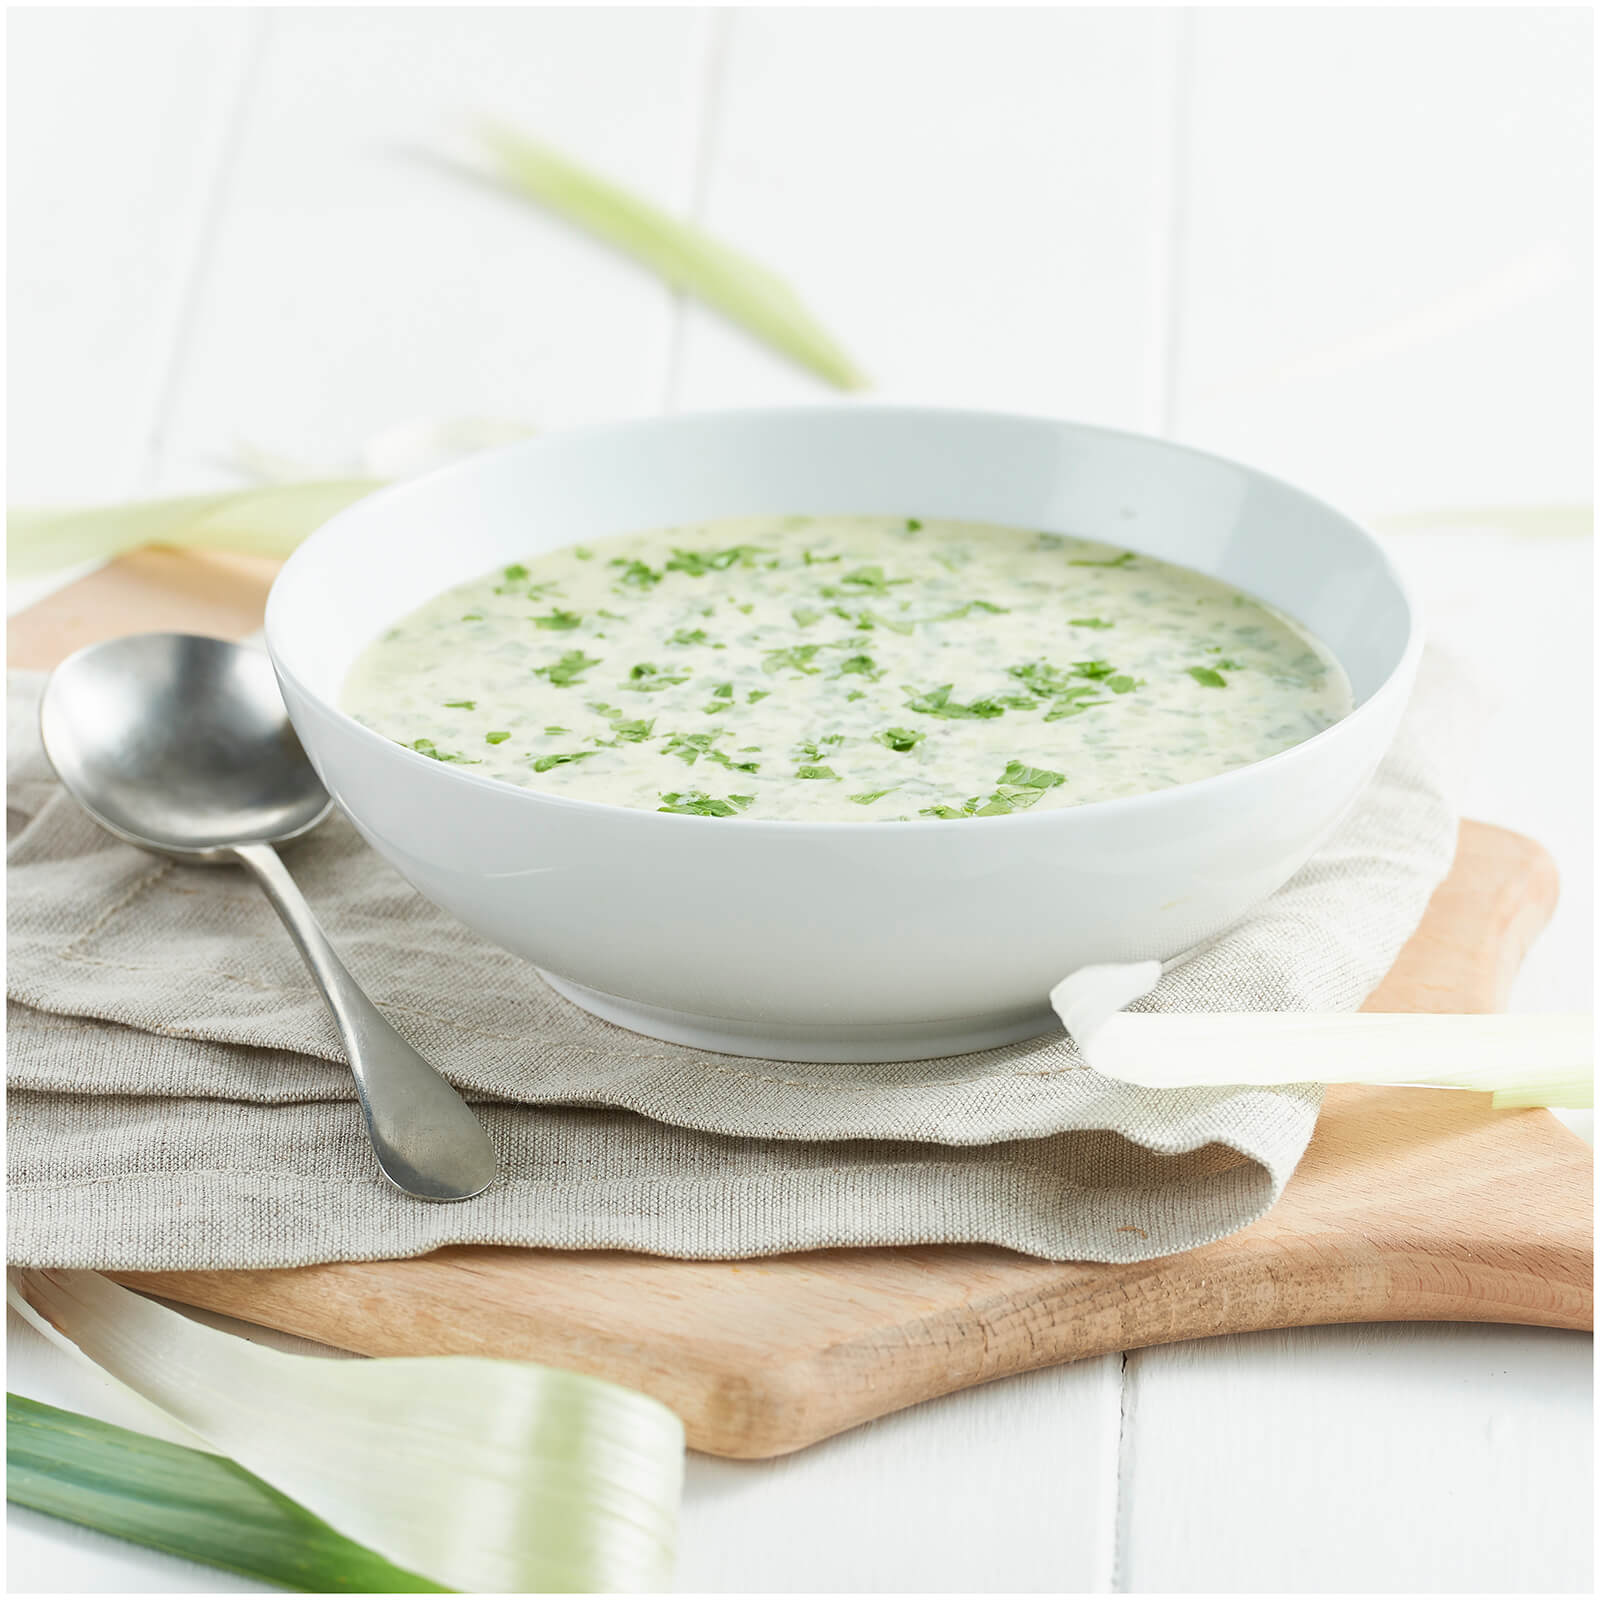 Exante Diet Meal Replacement Chicken and Leek Soup